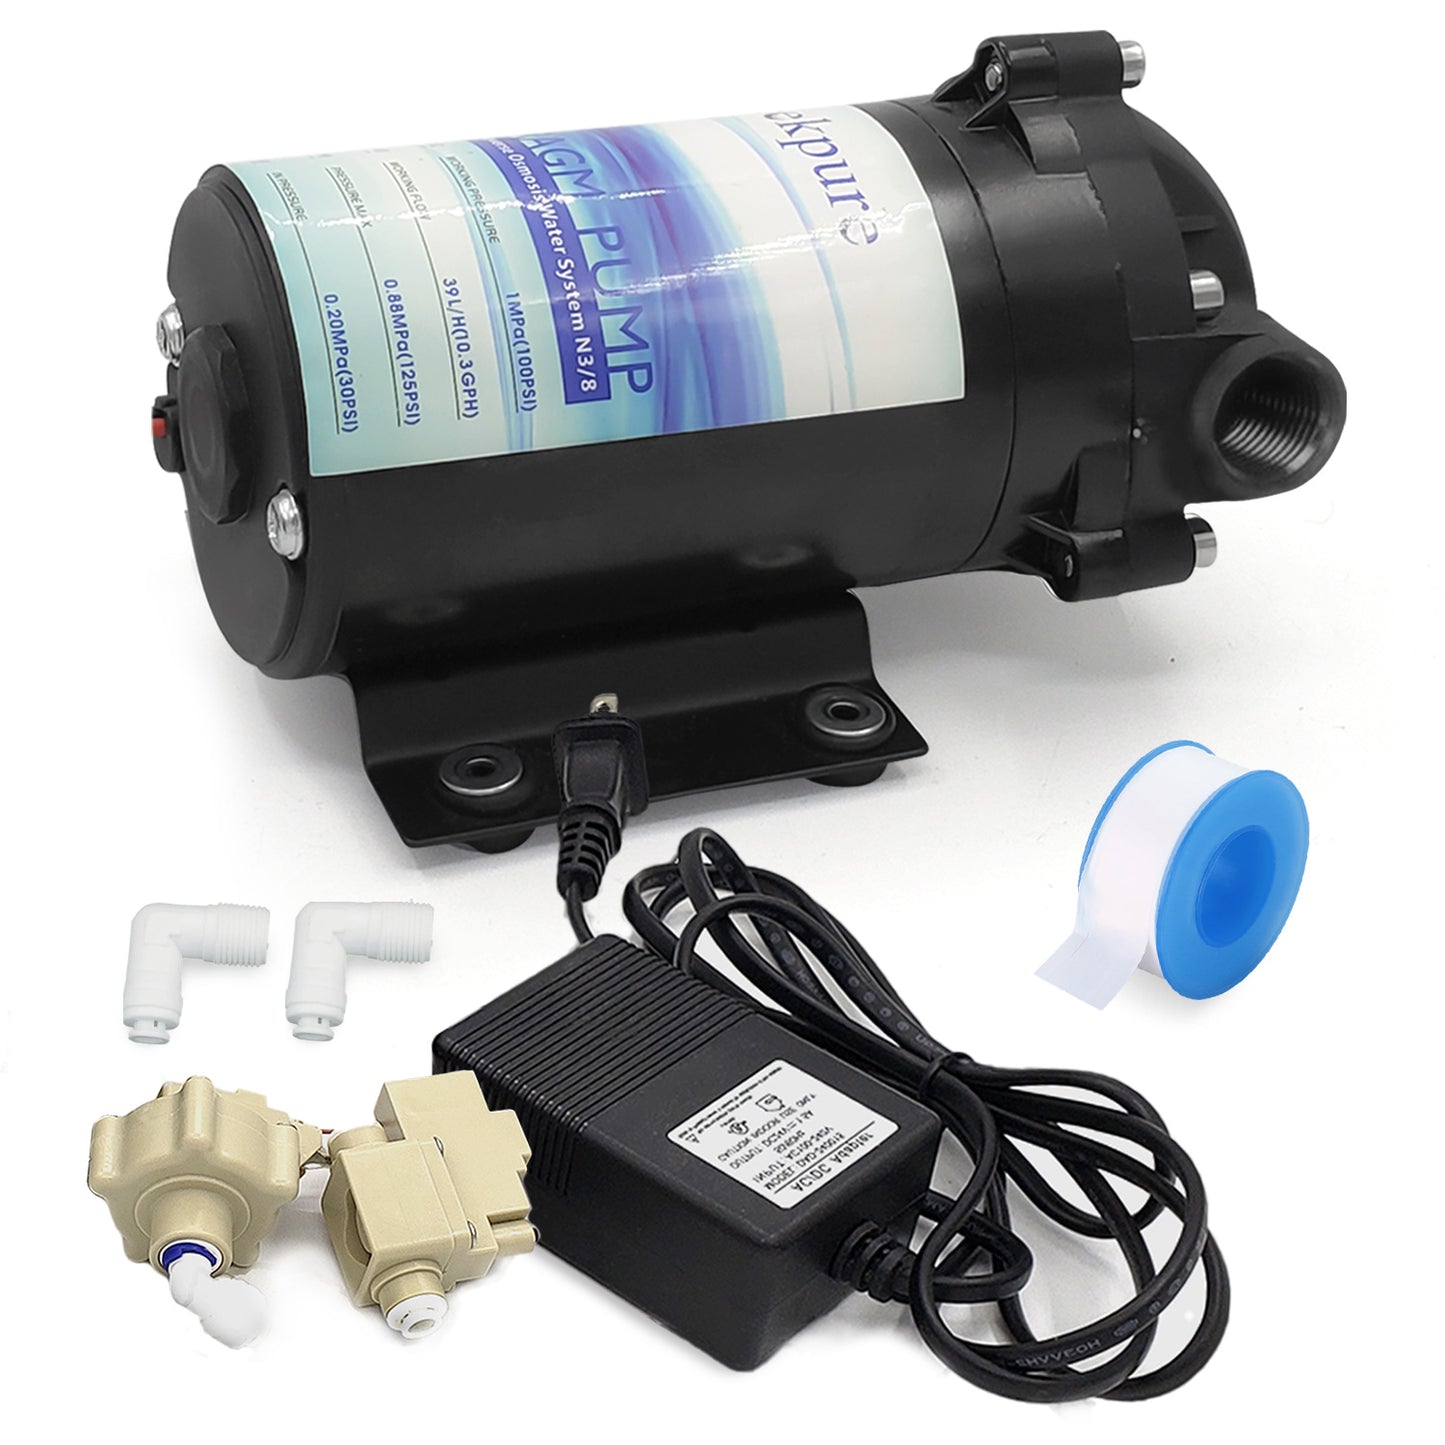 Booster Pump + Transformer + High & Low Pressure Switch + Fittings Kit for RO System